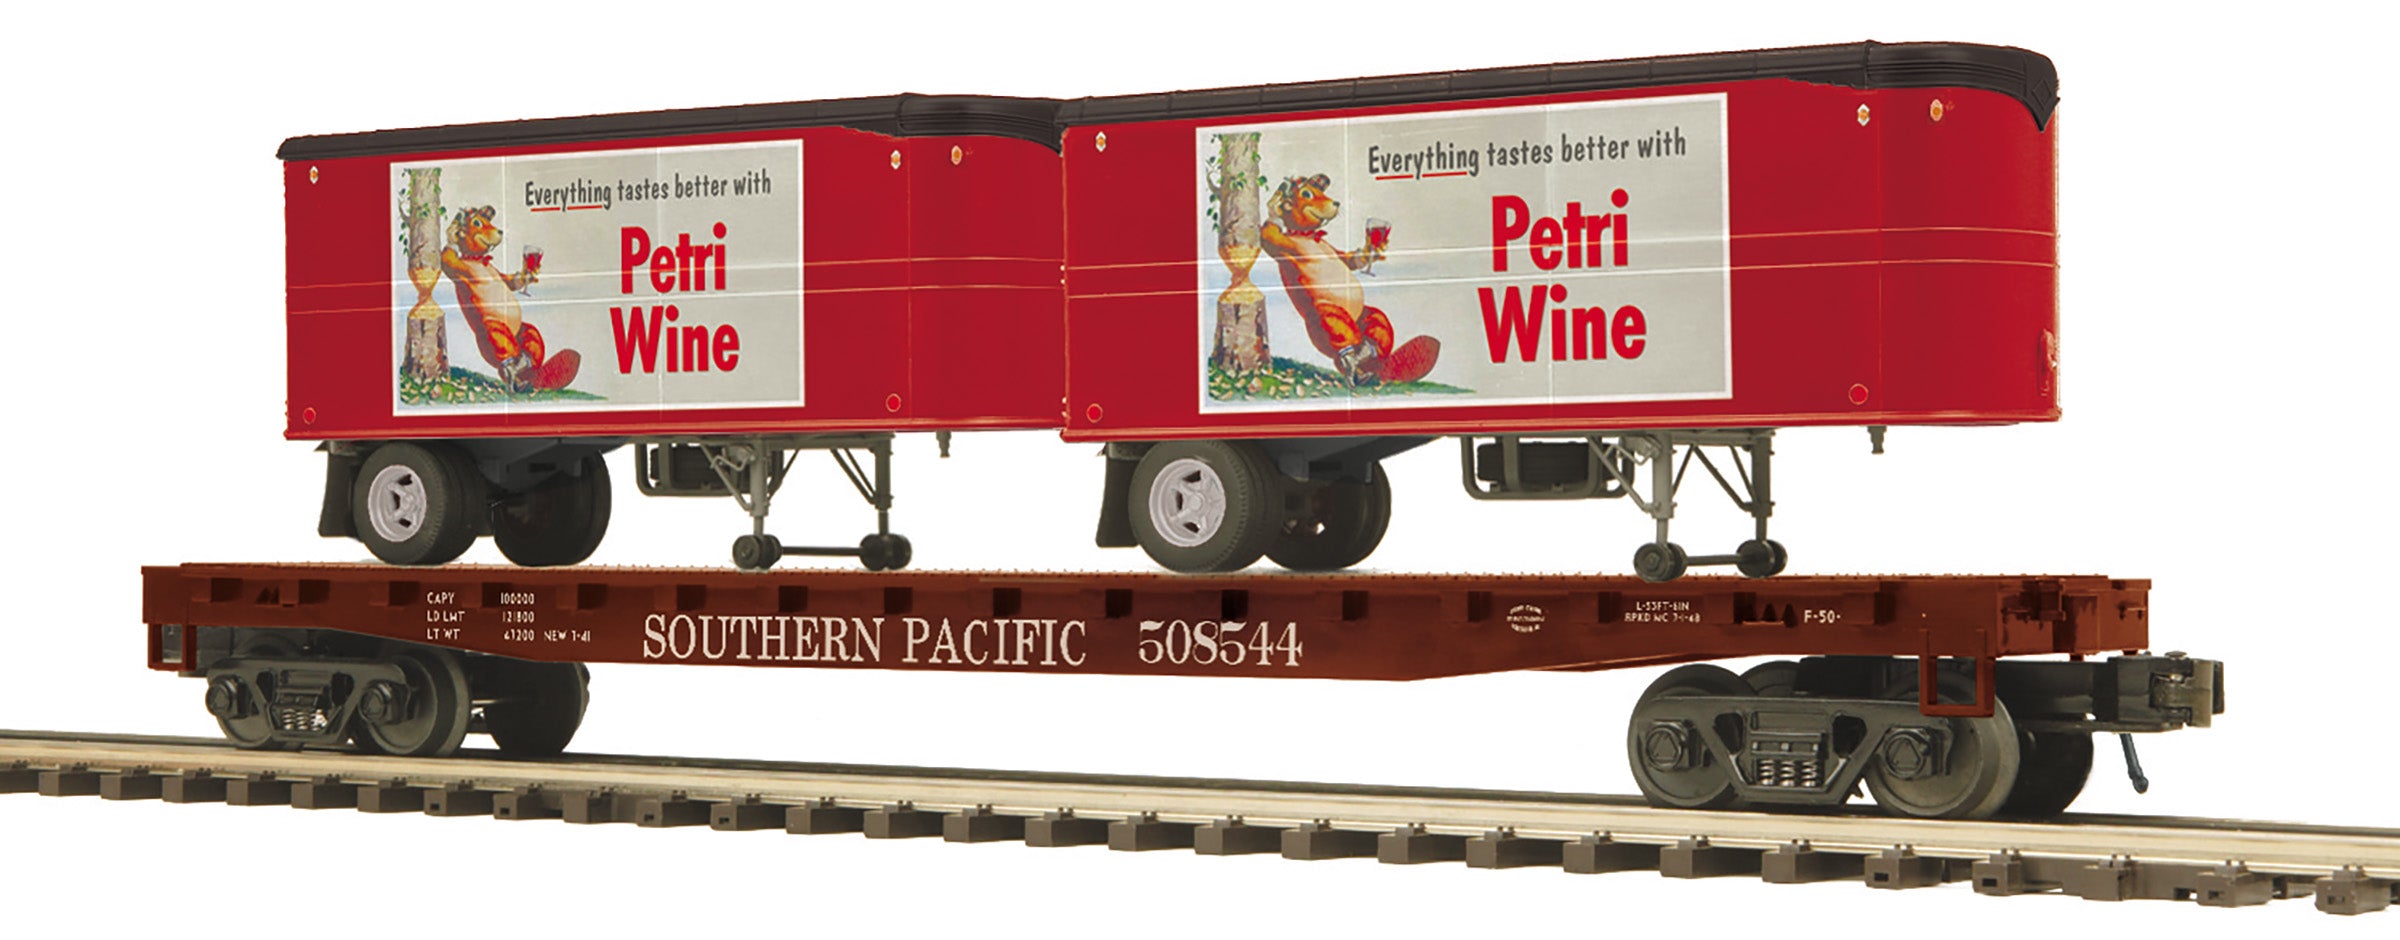 MTH 20-95557 - Flat Car "Southern Pacific" w/ (2) PUP Trailers (Petri Wine)